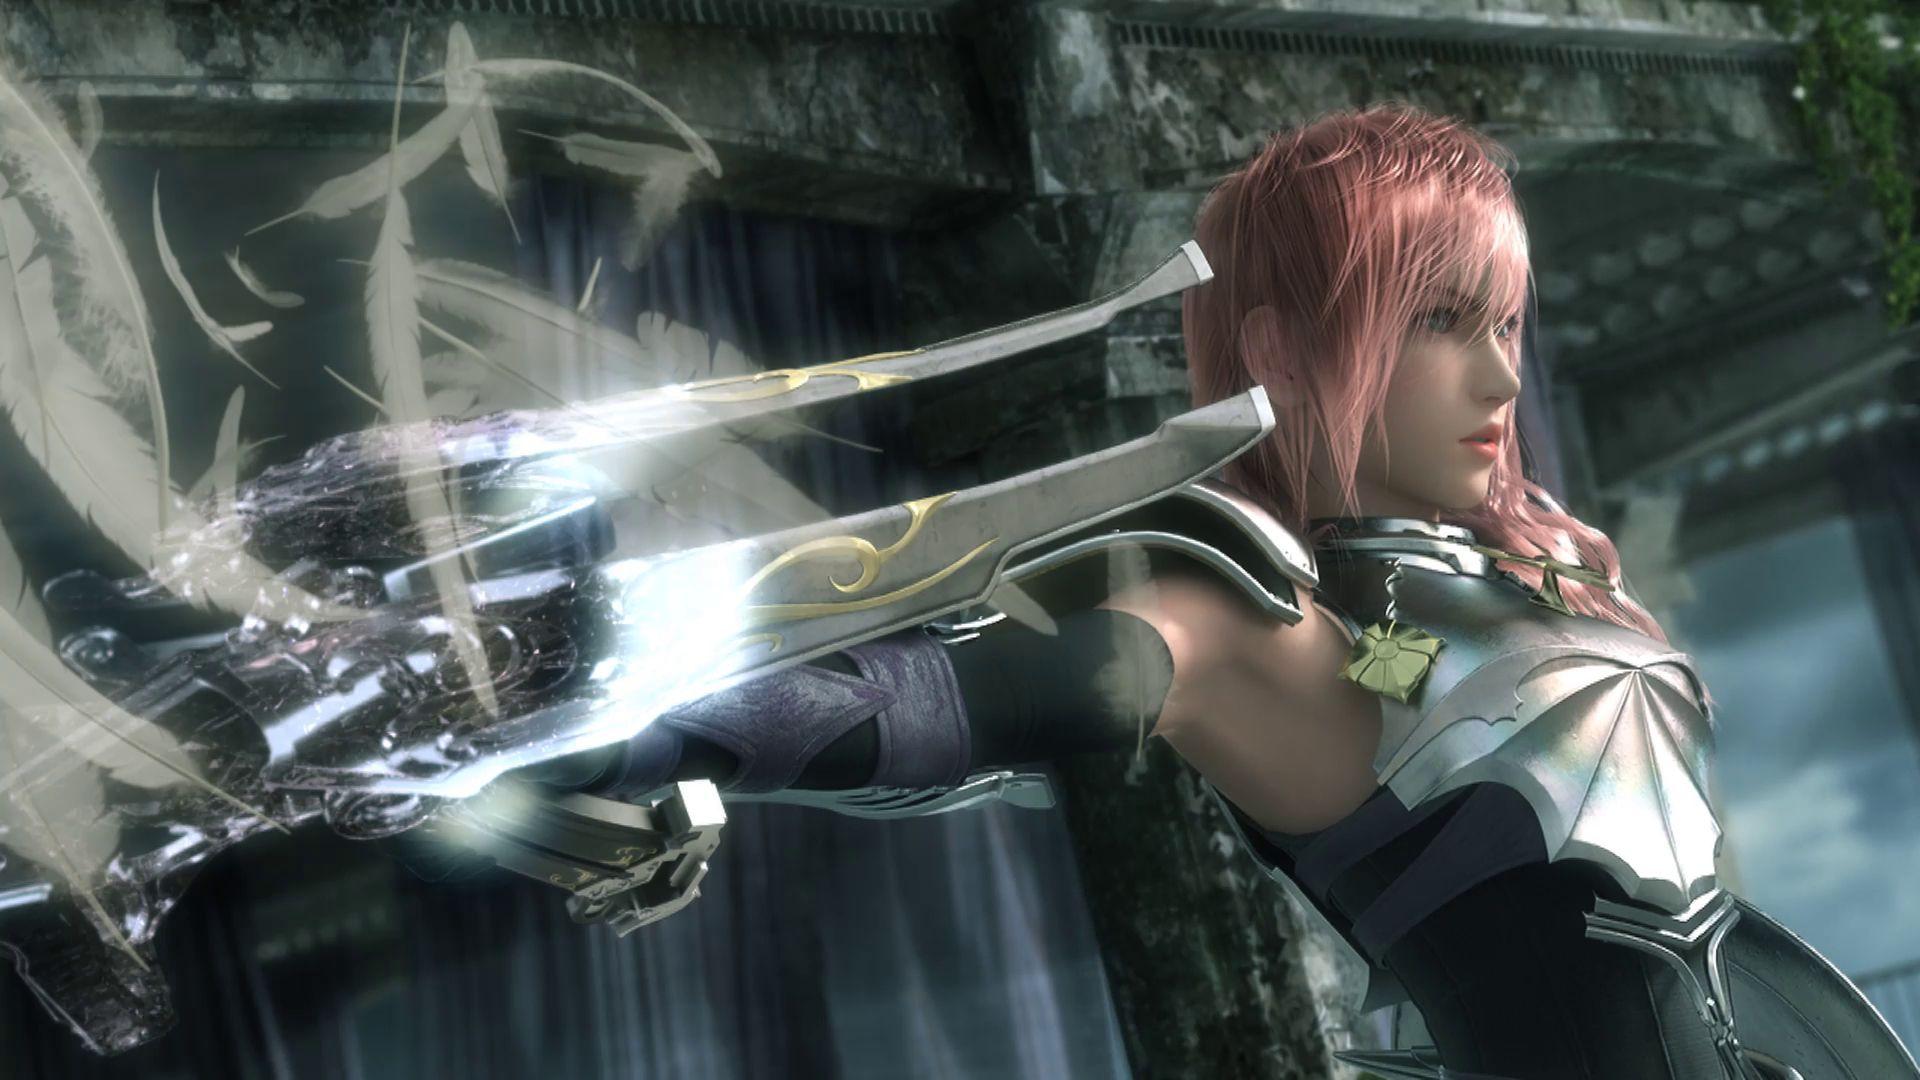 Final Fantasy Xiii Wallpapers Top Free Final Fantasy Xiii Backgrounds Wallpaperaccess